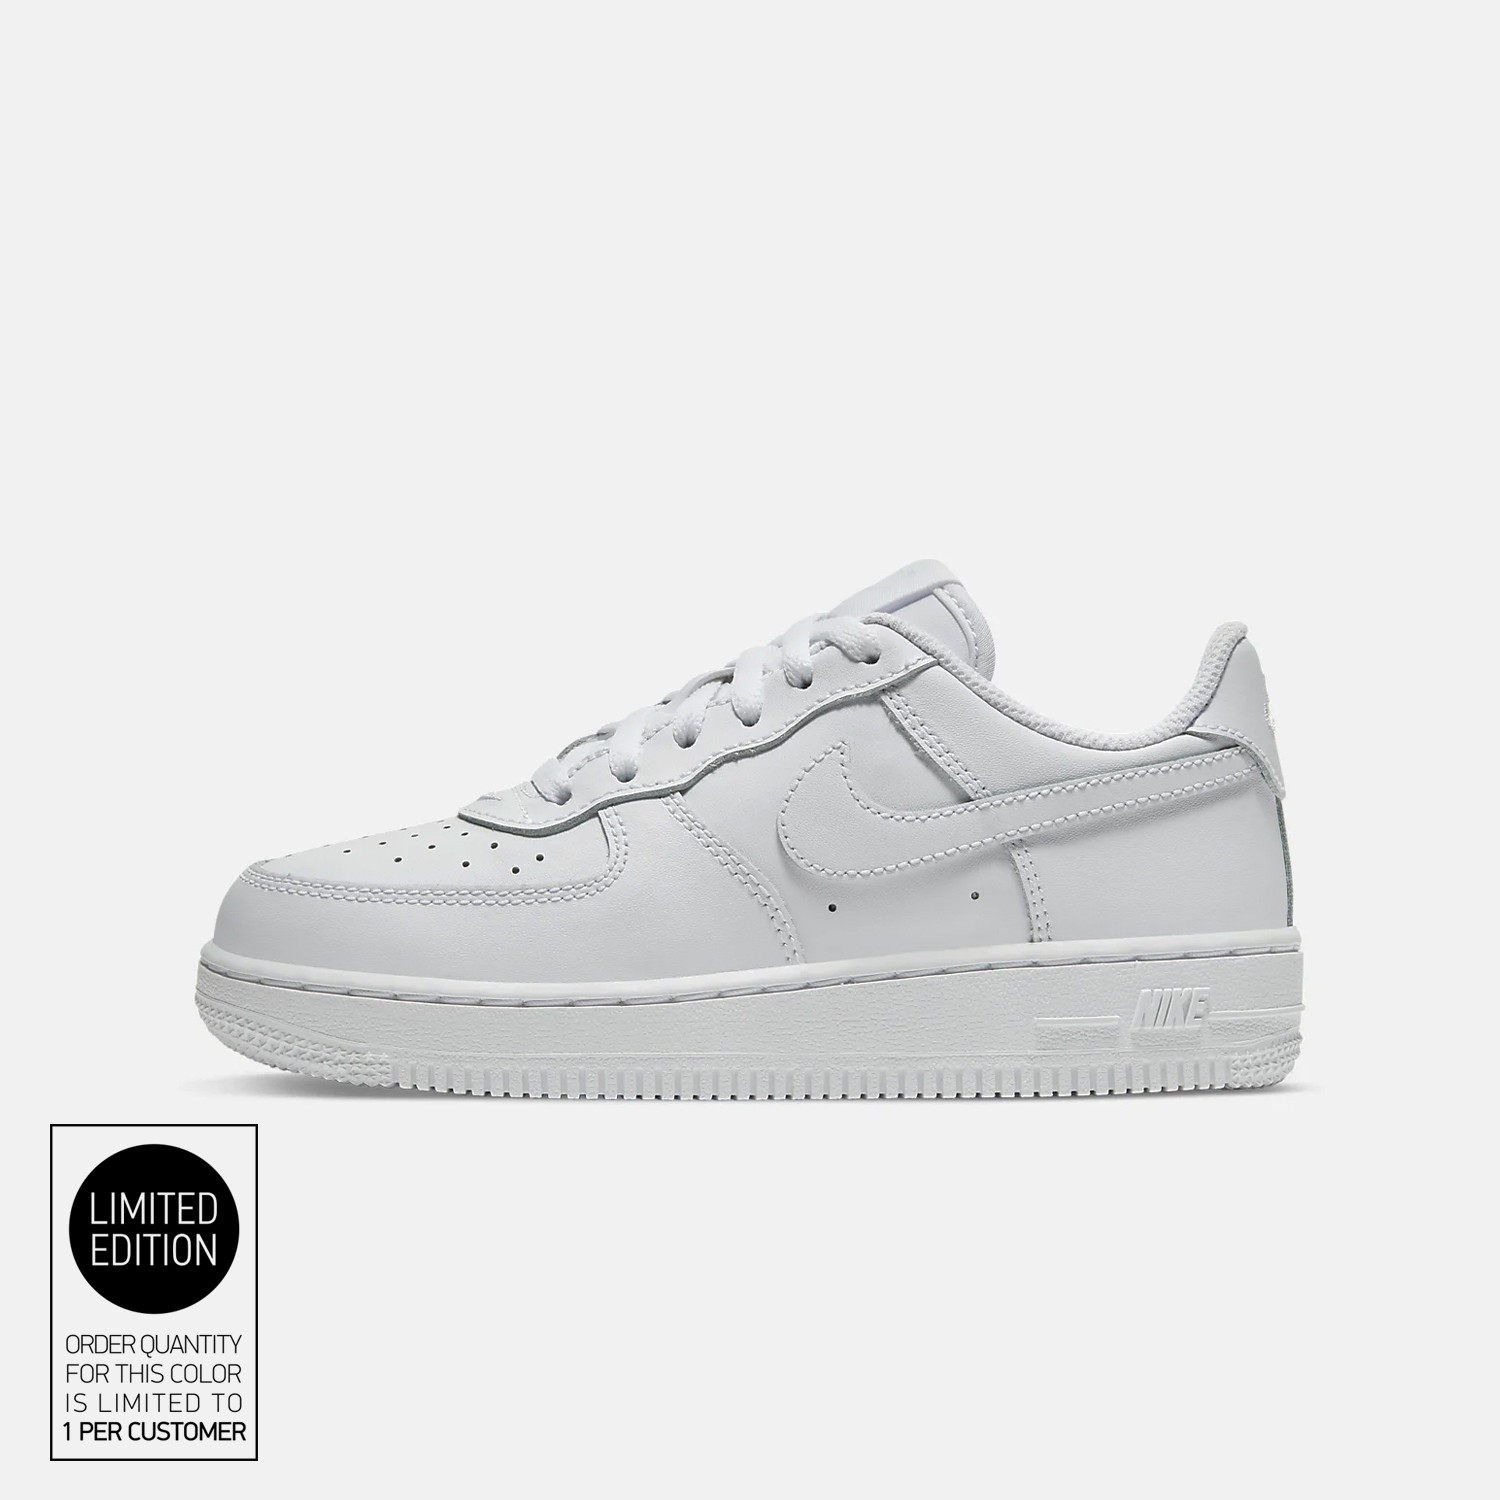 Nike Air Force 1 Παιδικά Παπούτσια (1080031229_8920) 10800312298920